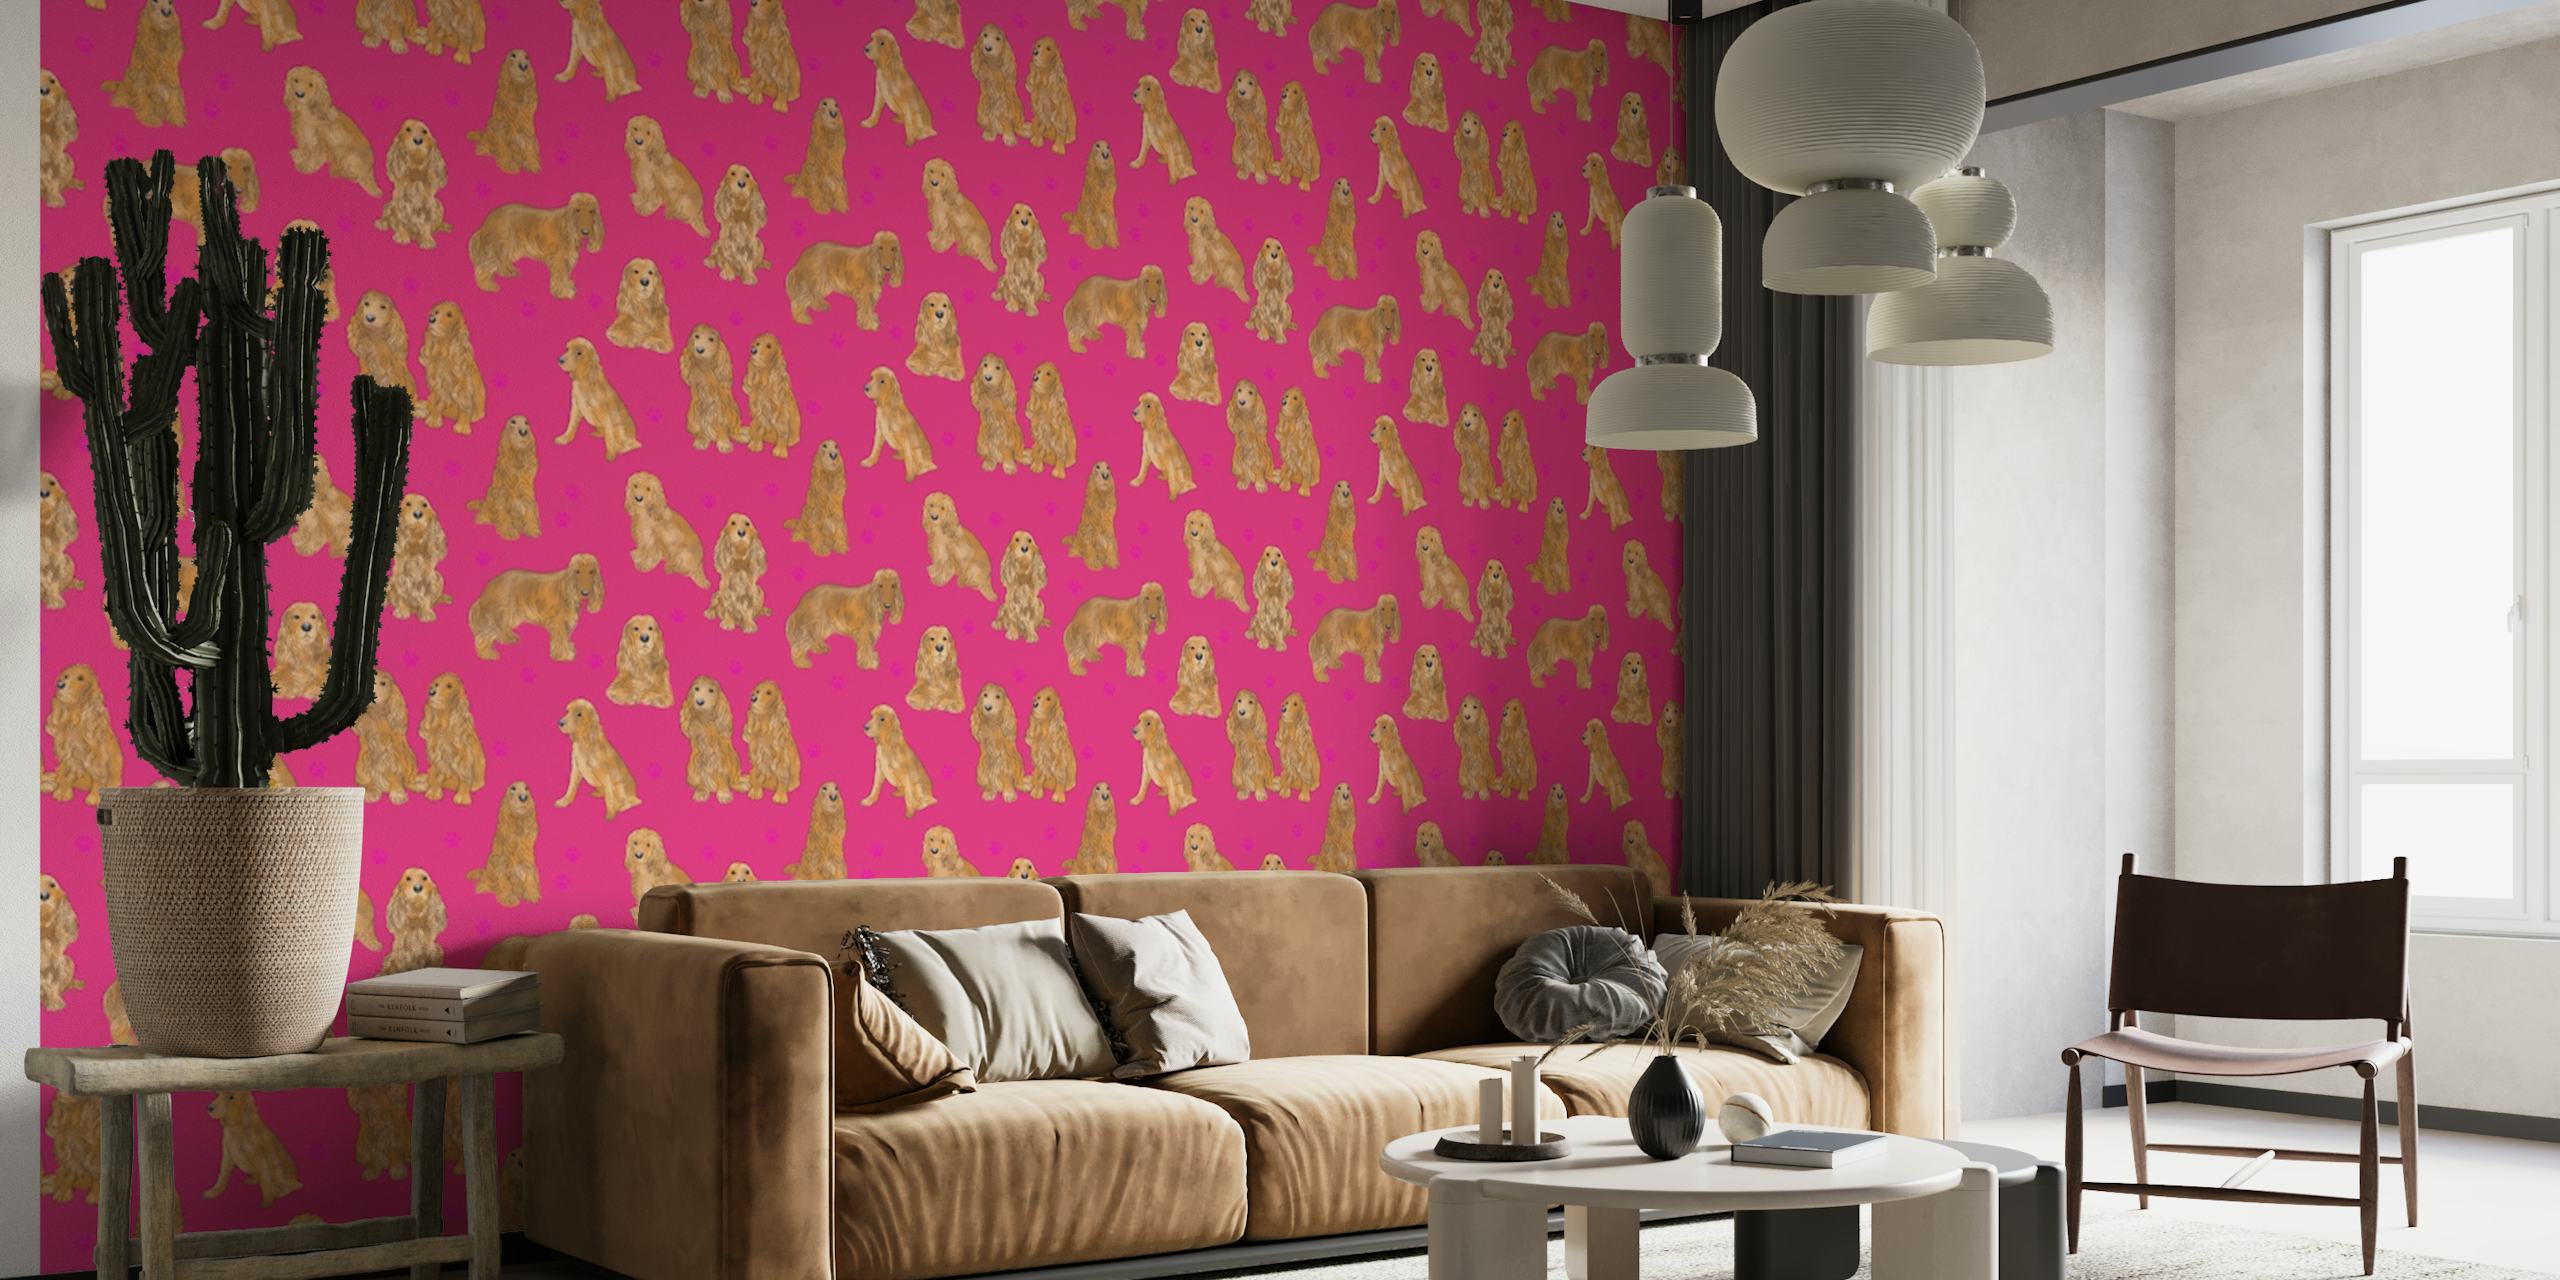 Wall mural with pattern of Cocker Spaniel dogs on pink background